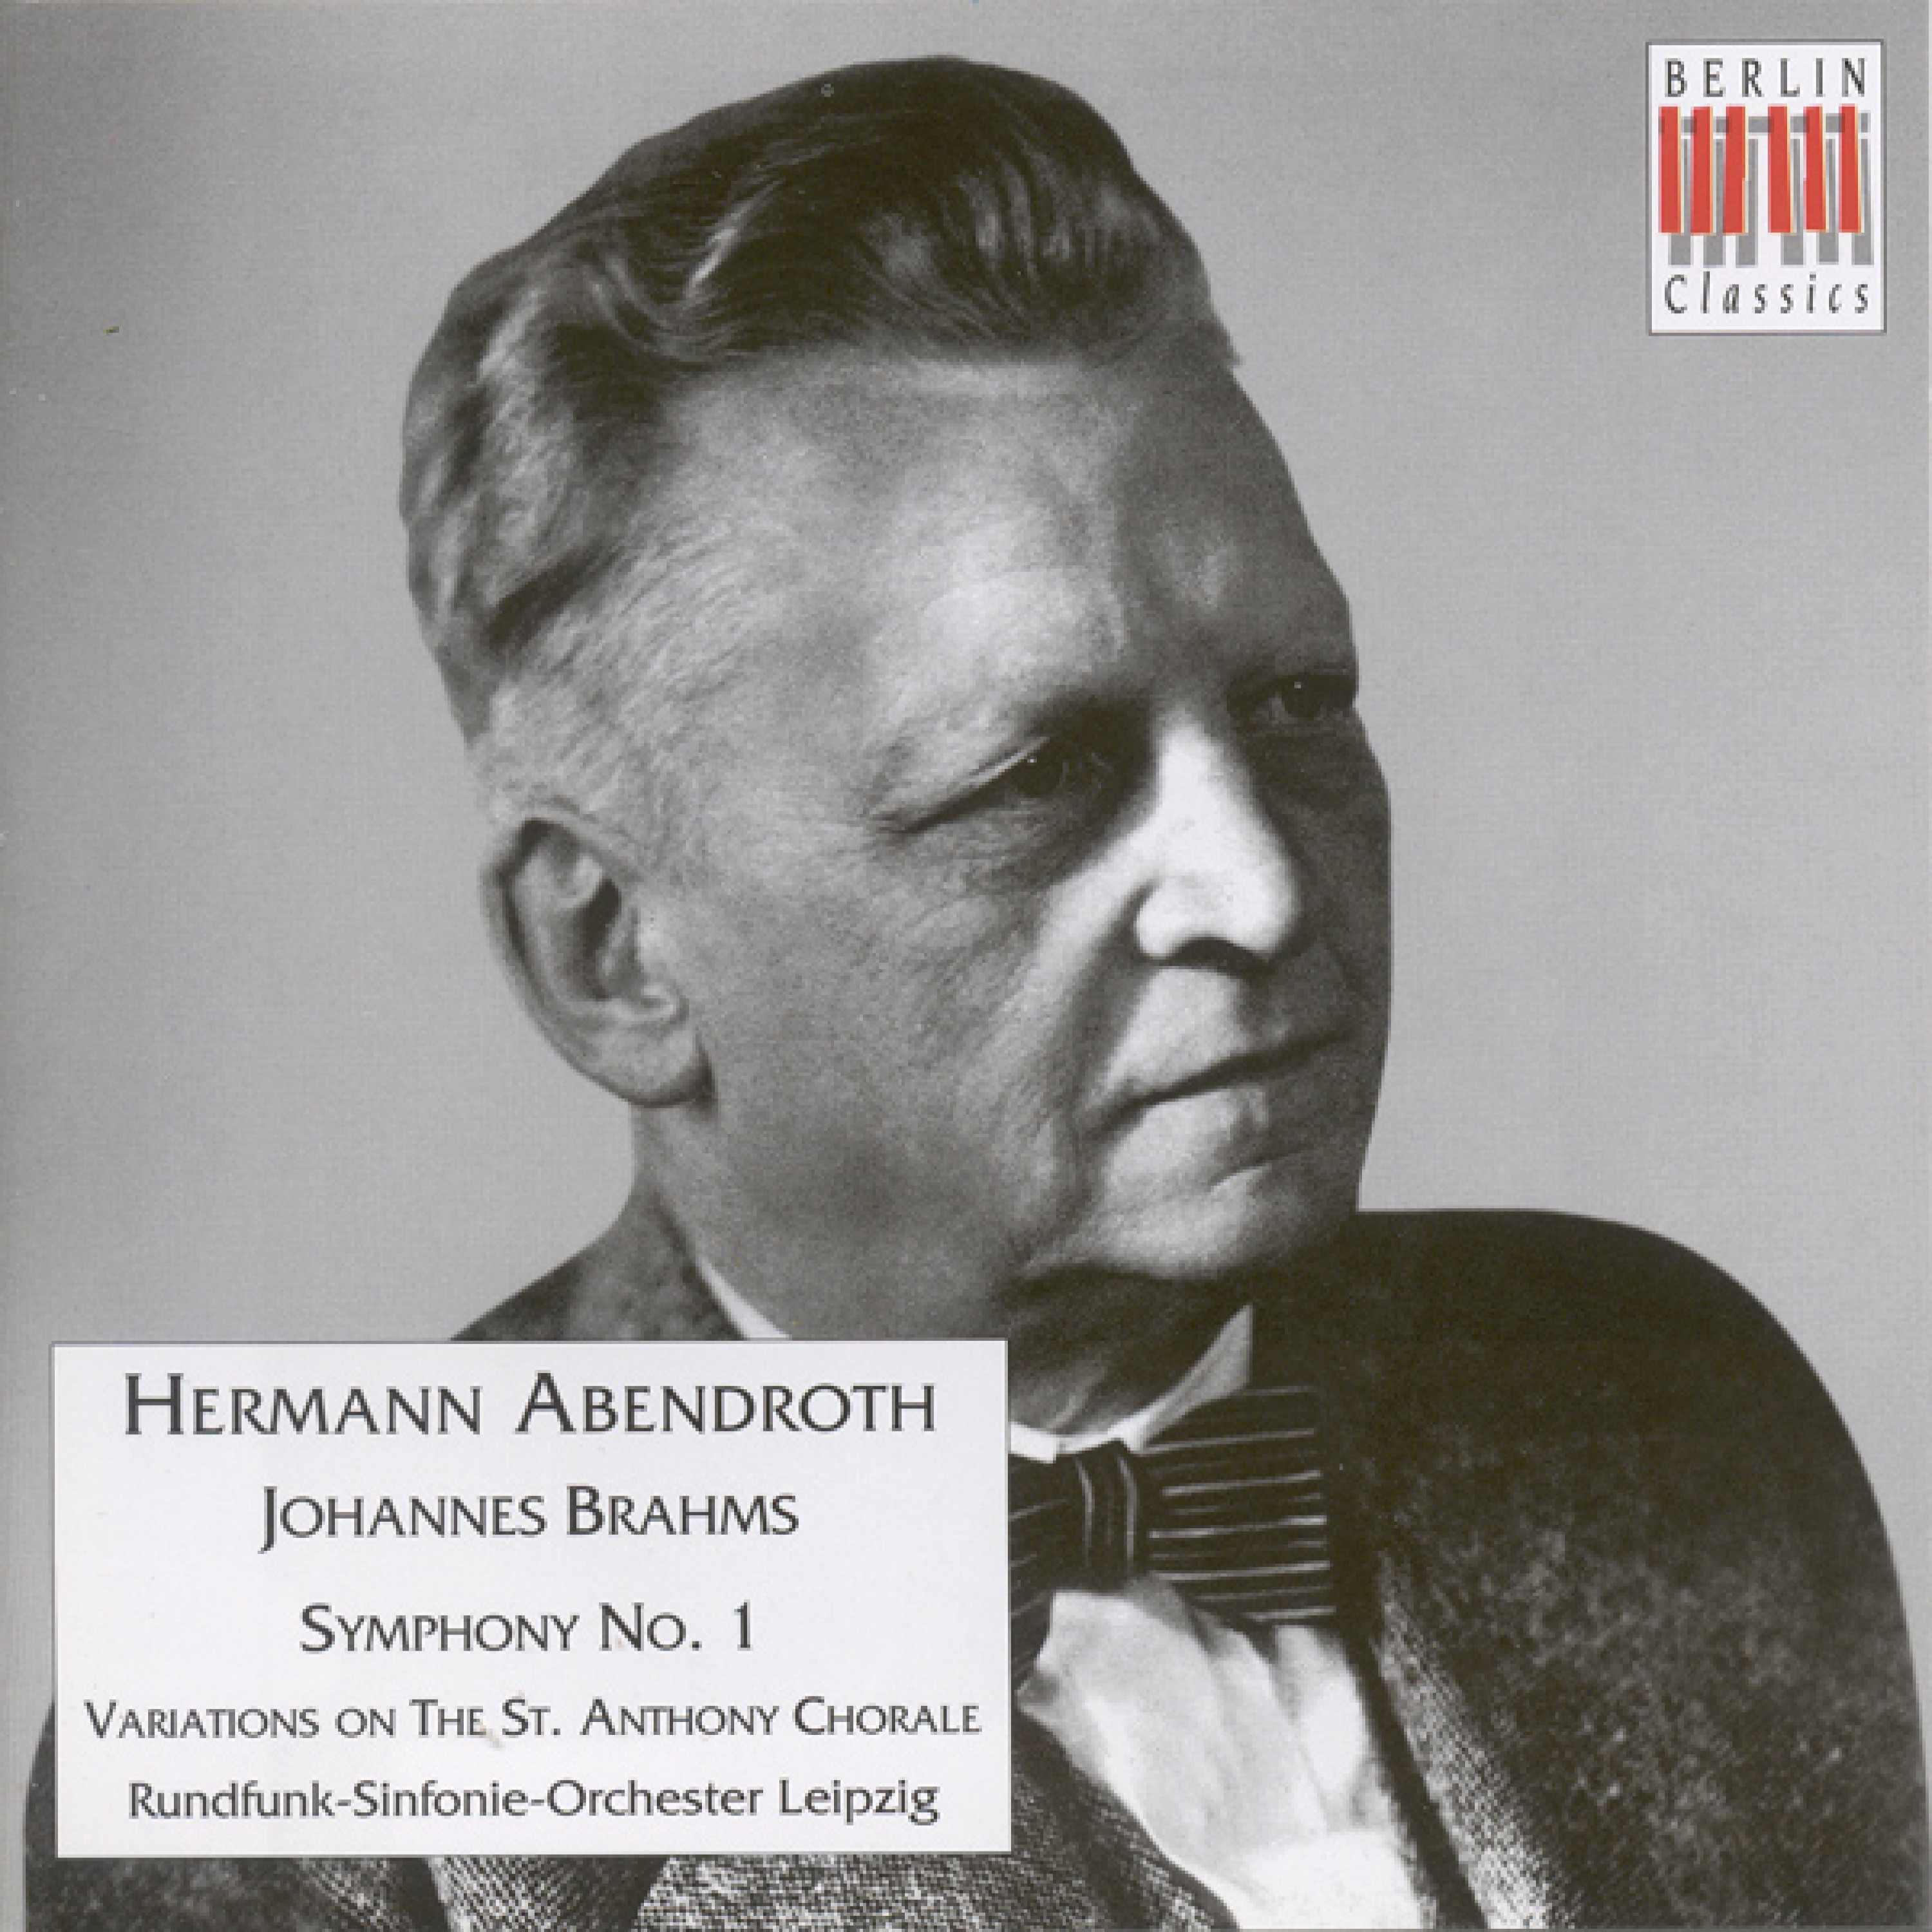 Variations on a Theme by Haydn, Op. 56a, "St. Anthony Variations": Finale: Andante